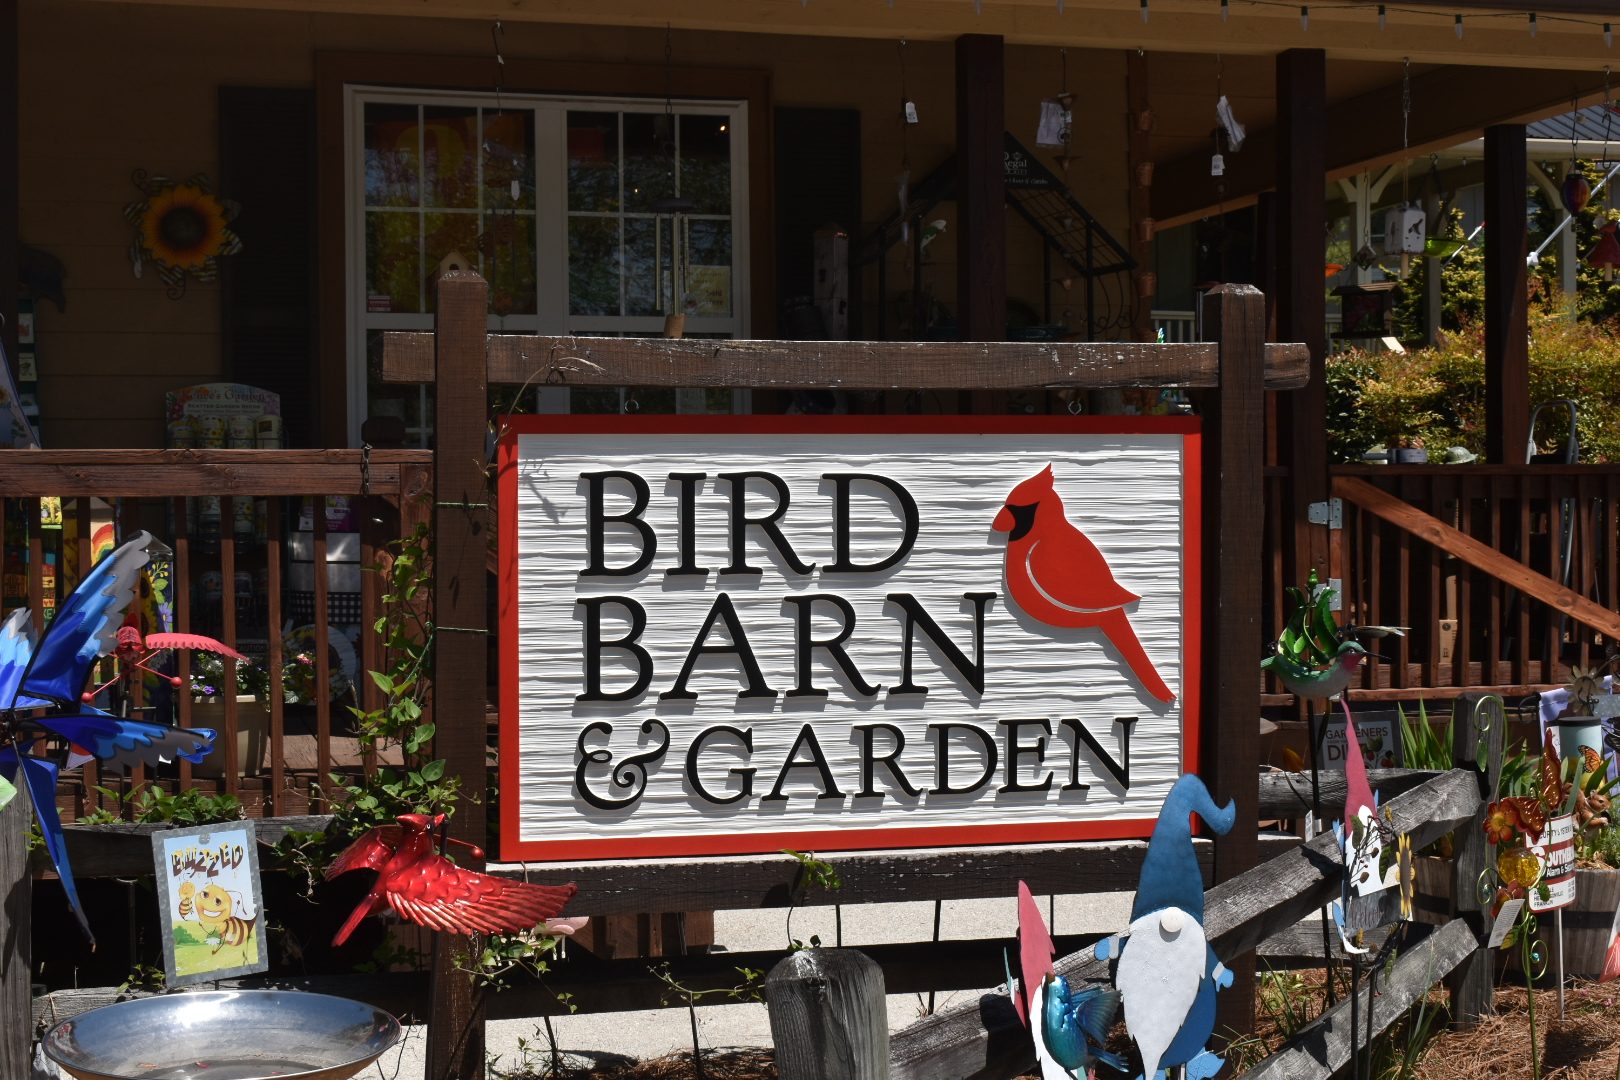 The exterior of a garden supply store with gnomes and bird figurines out front.